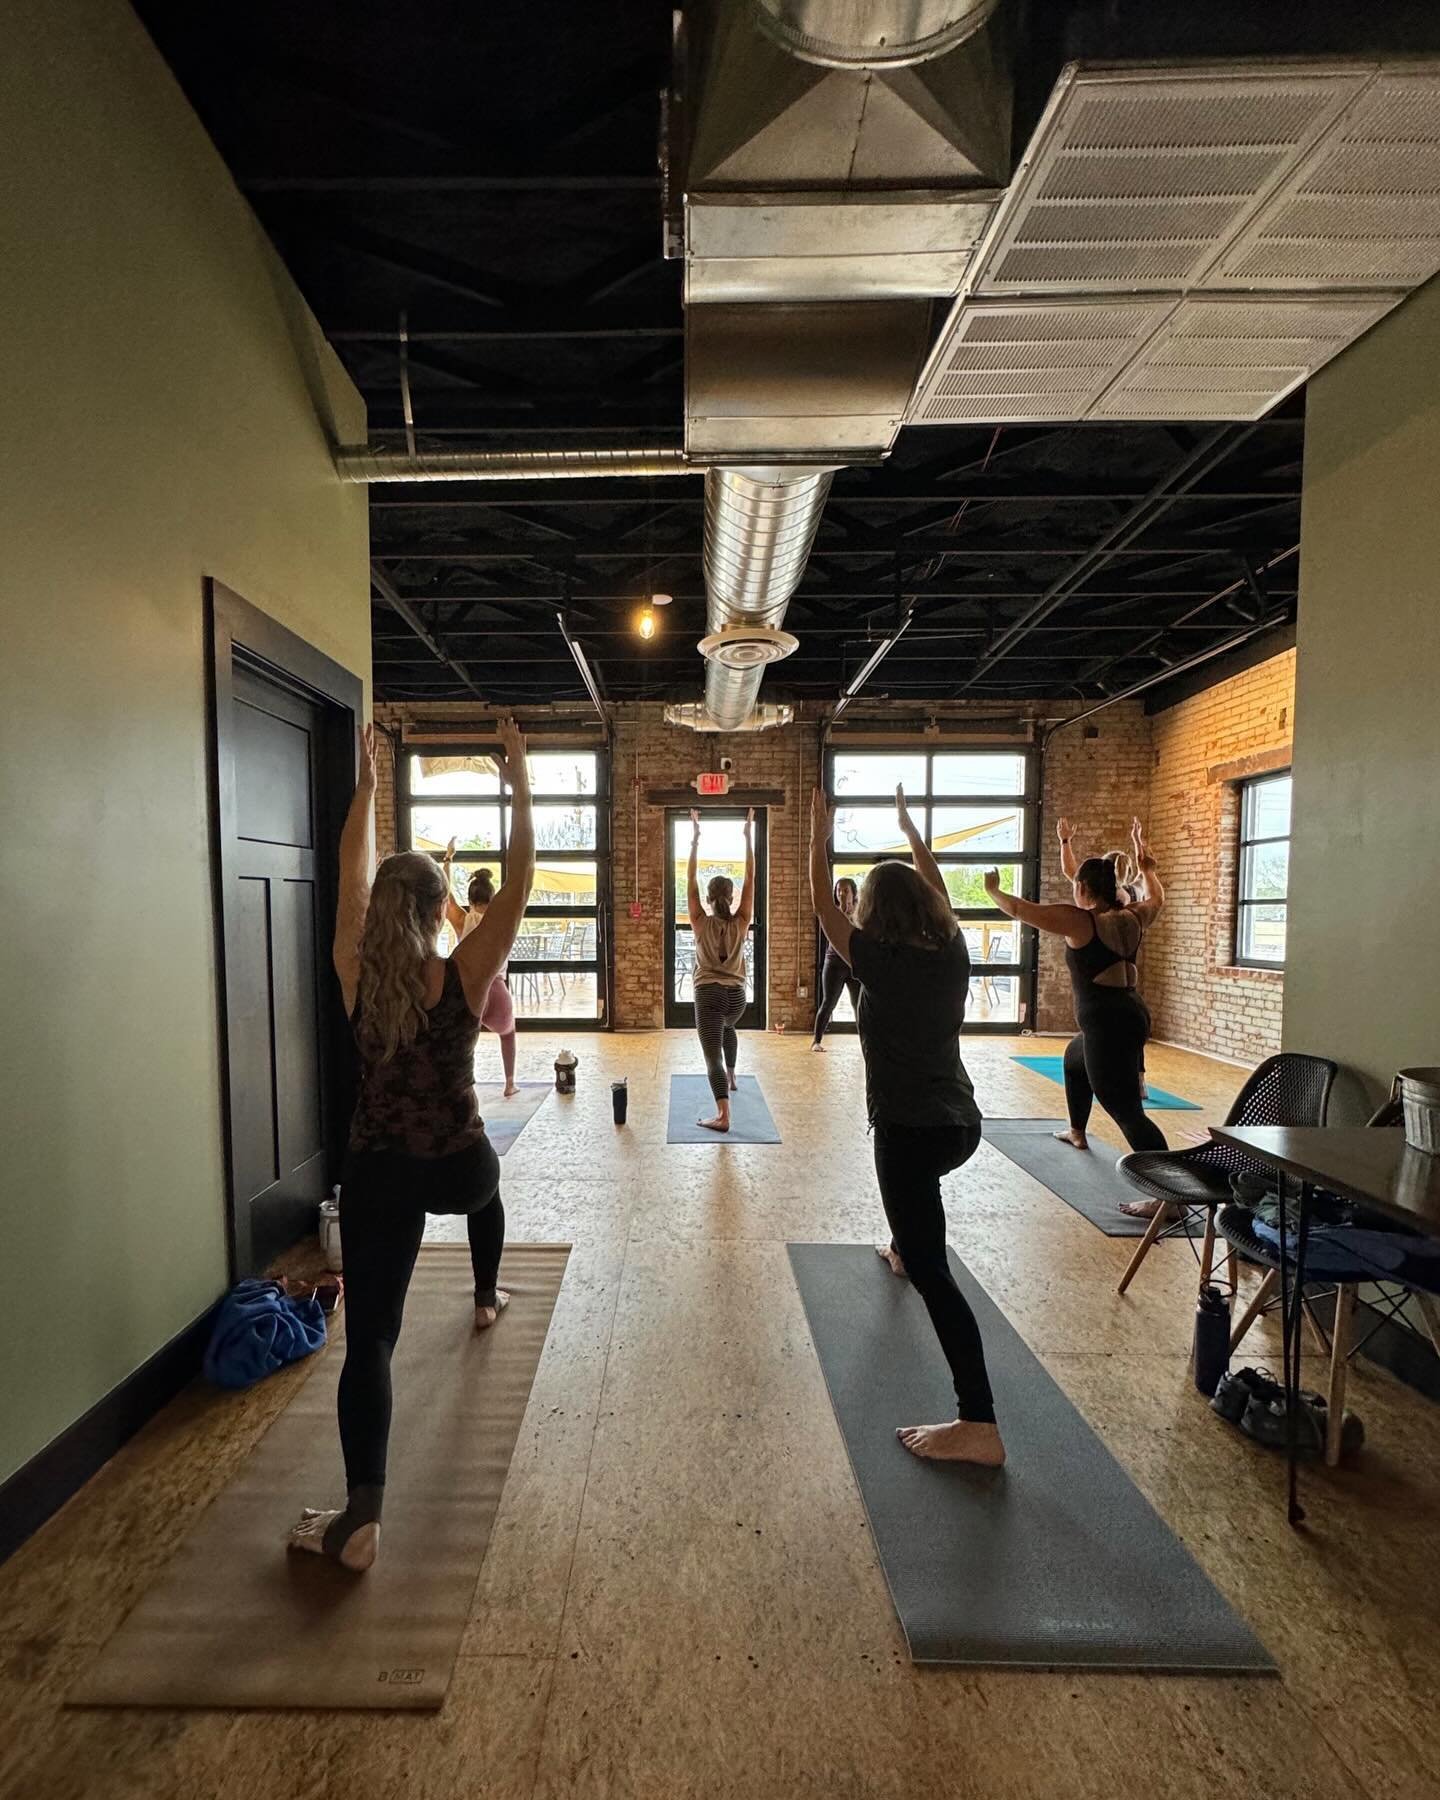 Yoga upstairs at The Print Shop every Thursday morning at 8am!

This class is guided by the amazing @lifewithmarinayoga ✨

$10 per class, Venmo or cash!

This space is so beautiful with the morning light pouring in. It&rsquo;s also full of beautiful,